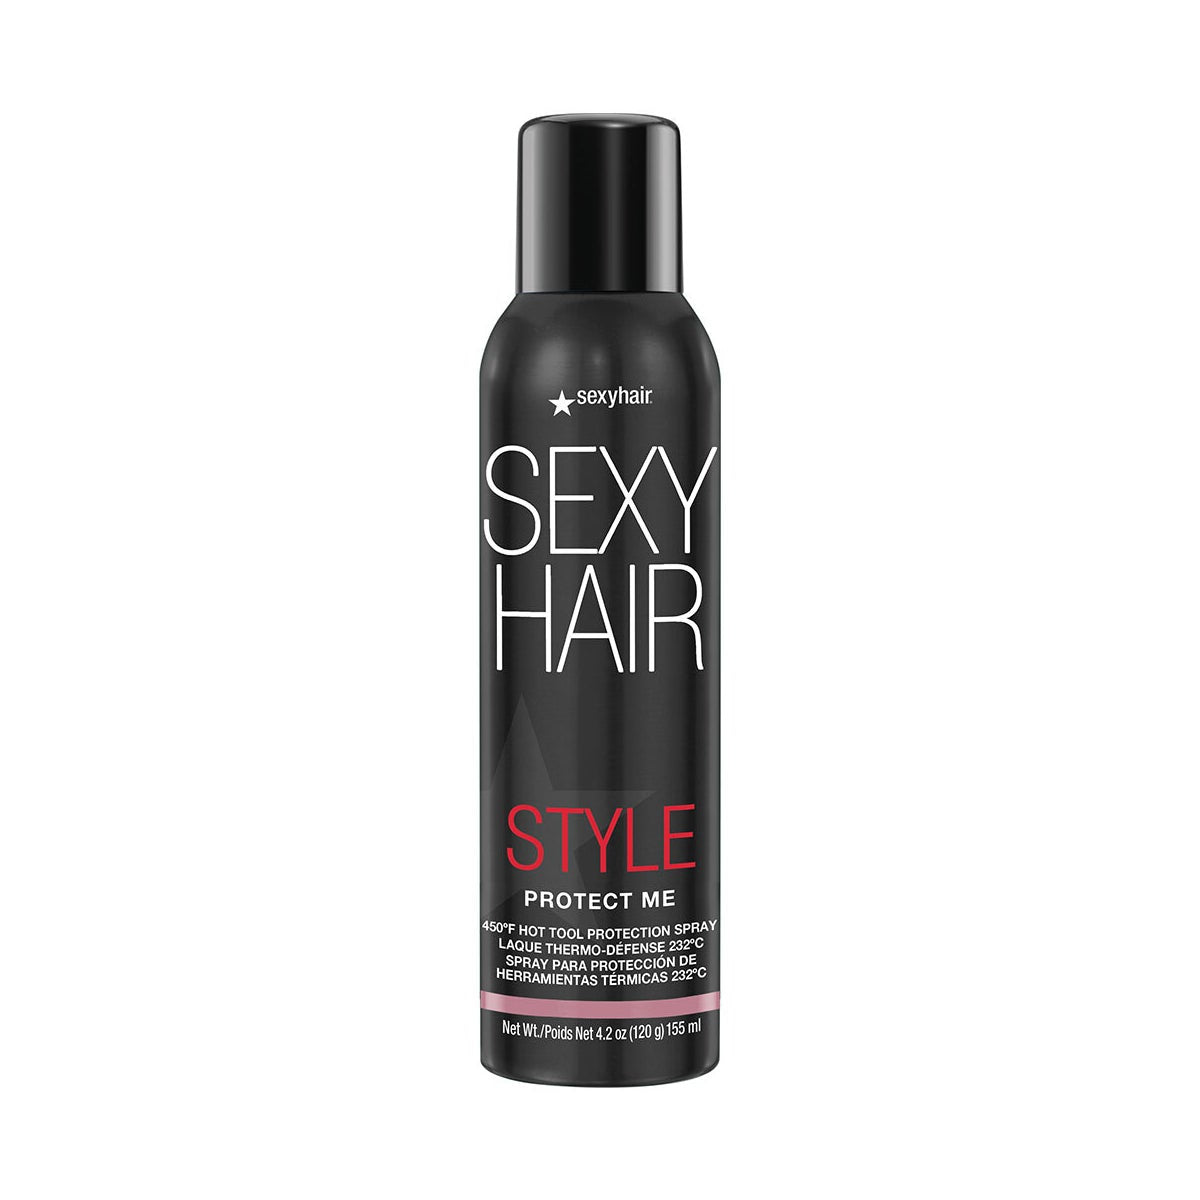 Sexy Hair Style Protect Me 450°F Hot Tool Protection Spray 155ml